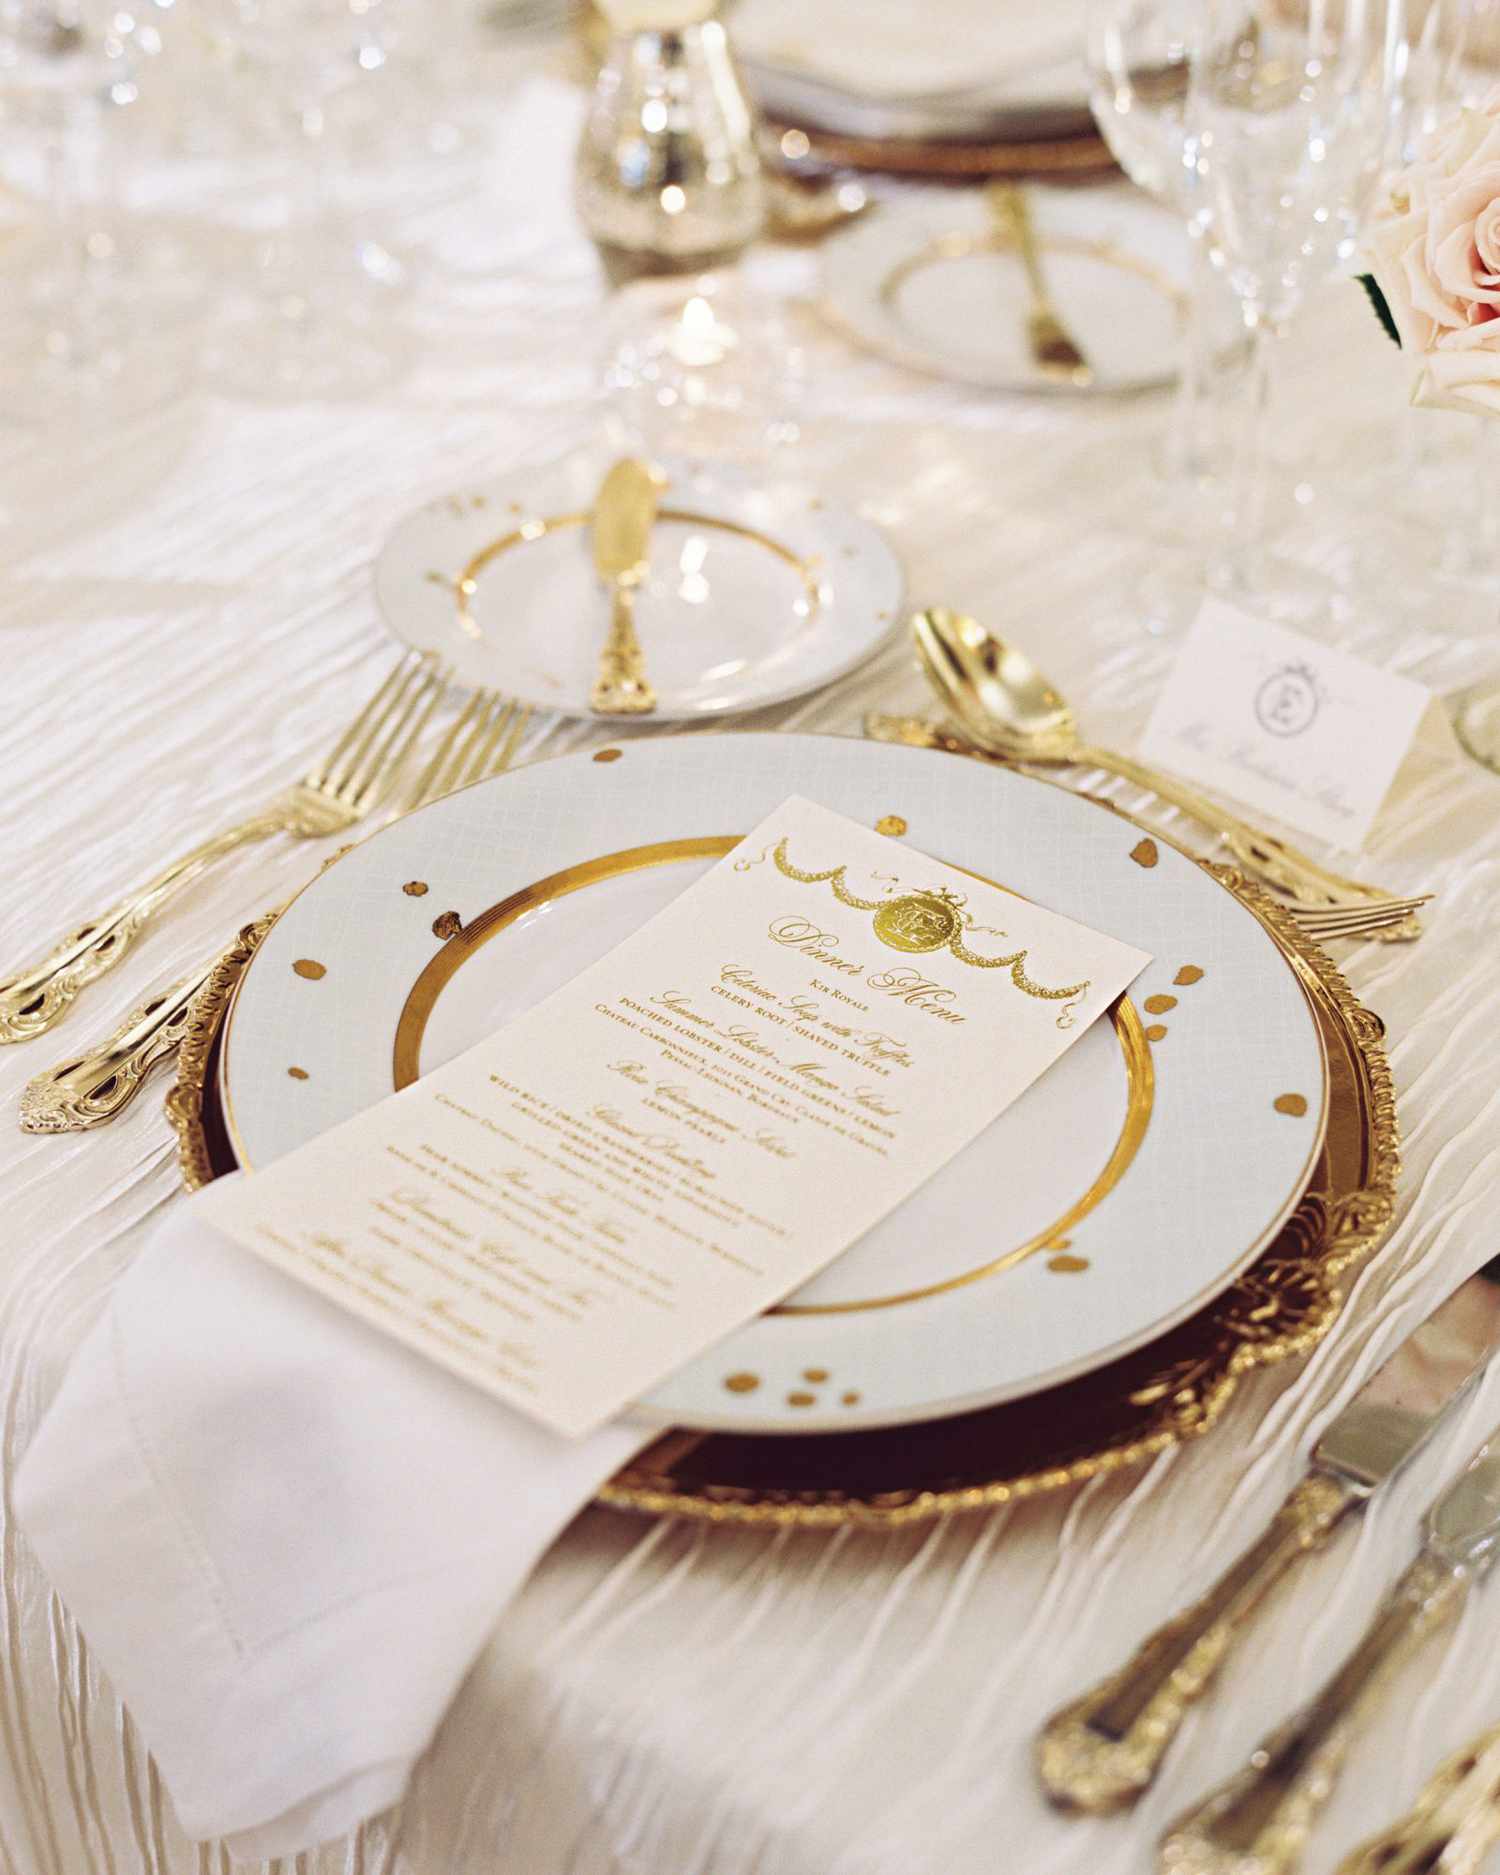 The Place Settings